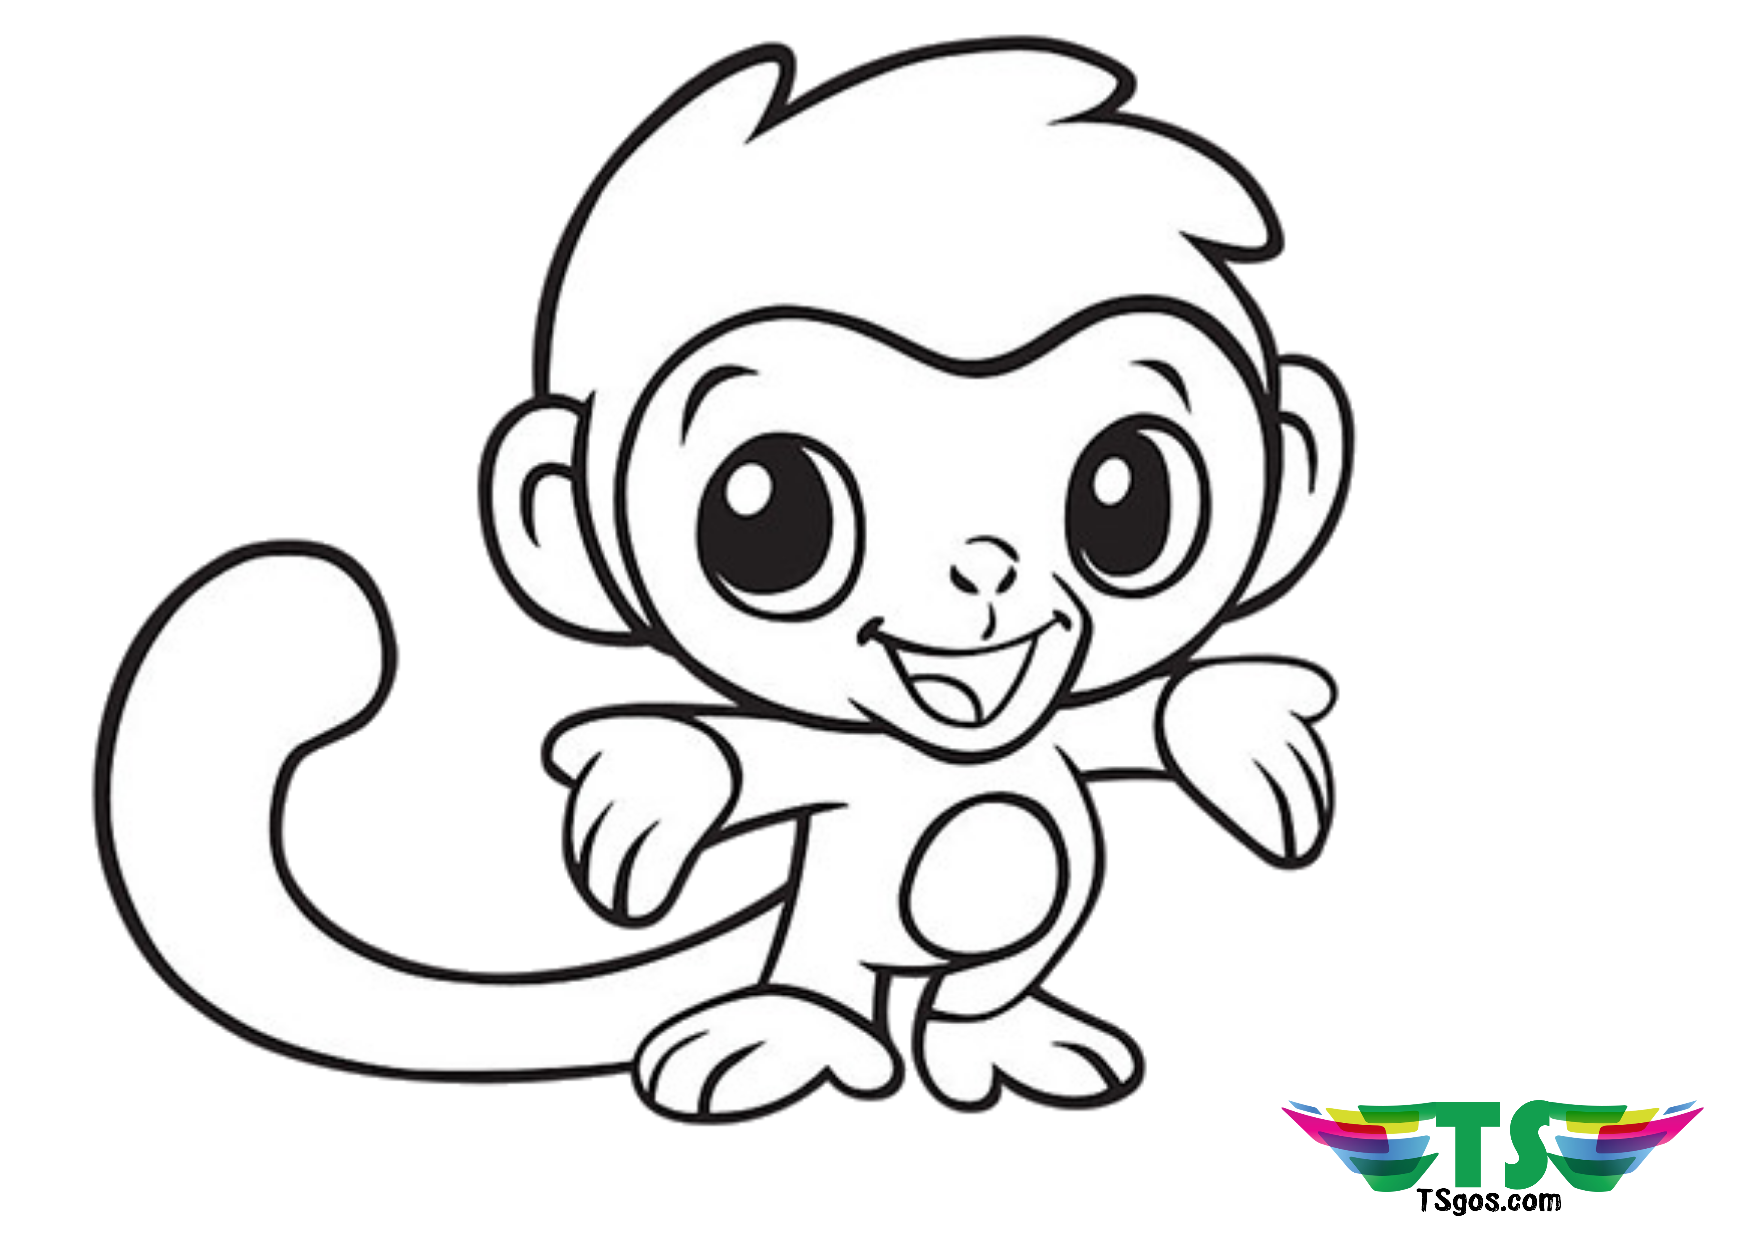 Free download to print cute baby monkey coloring page.   TSgos.com ...